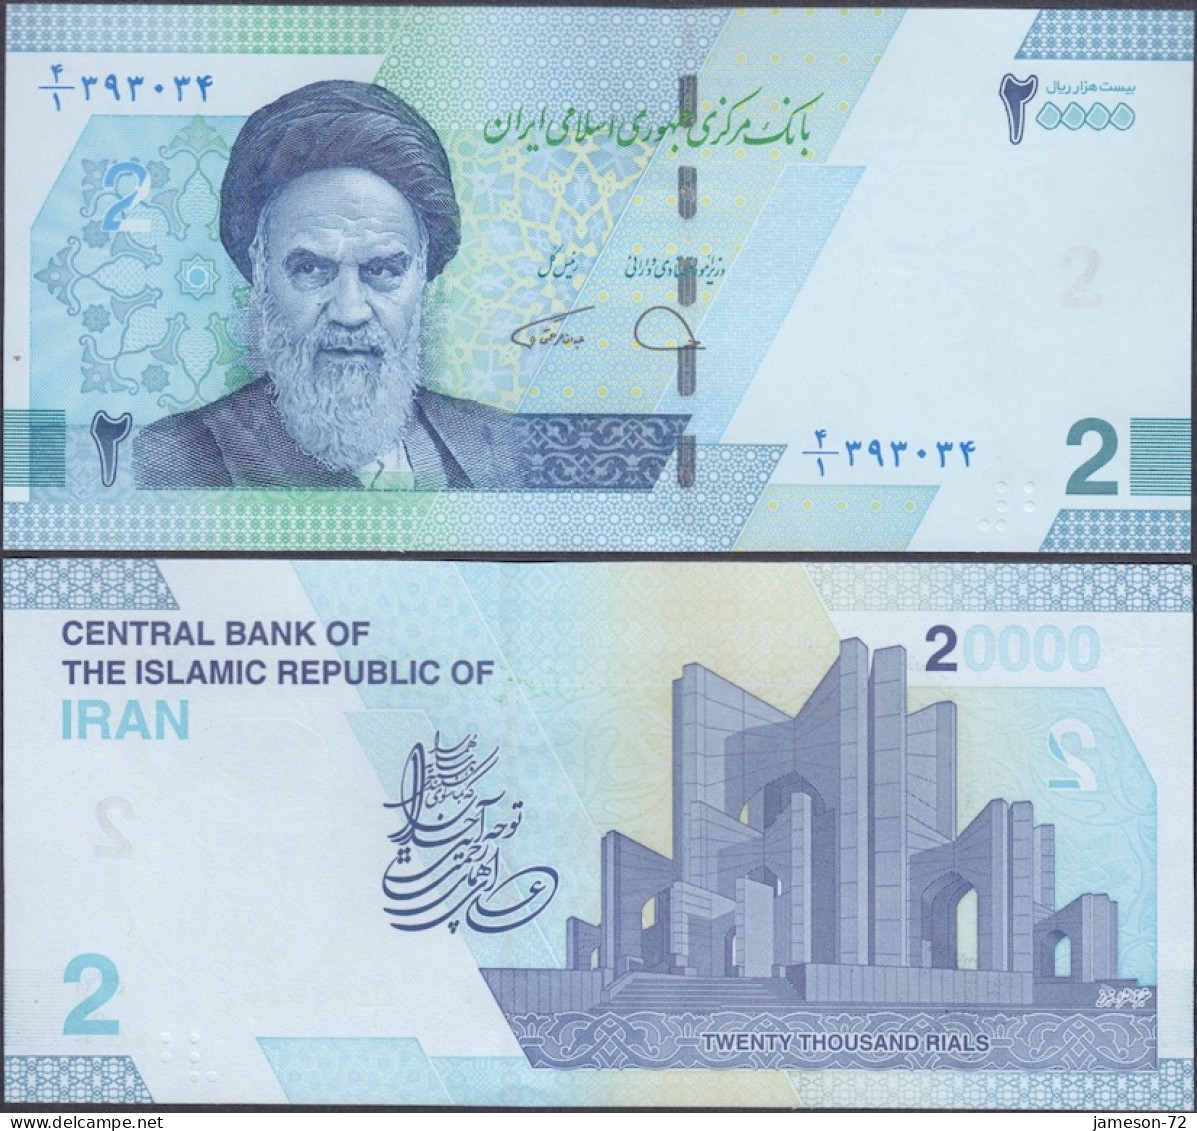 IRAN - 2 Tomans / 20000 Rials ND (2022) TBB# 299 Middle East Banknote - Edelweiss Coins - Iran